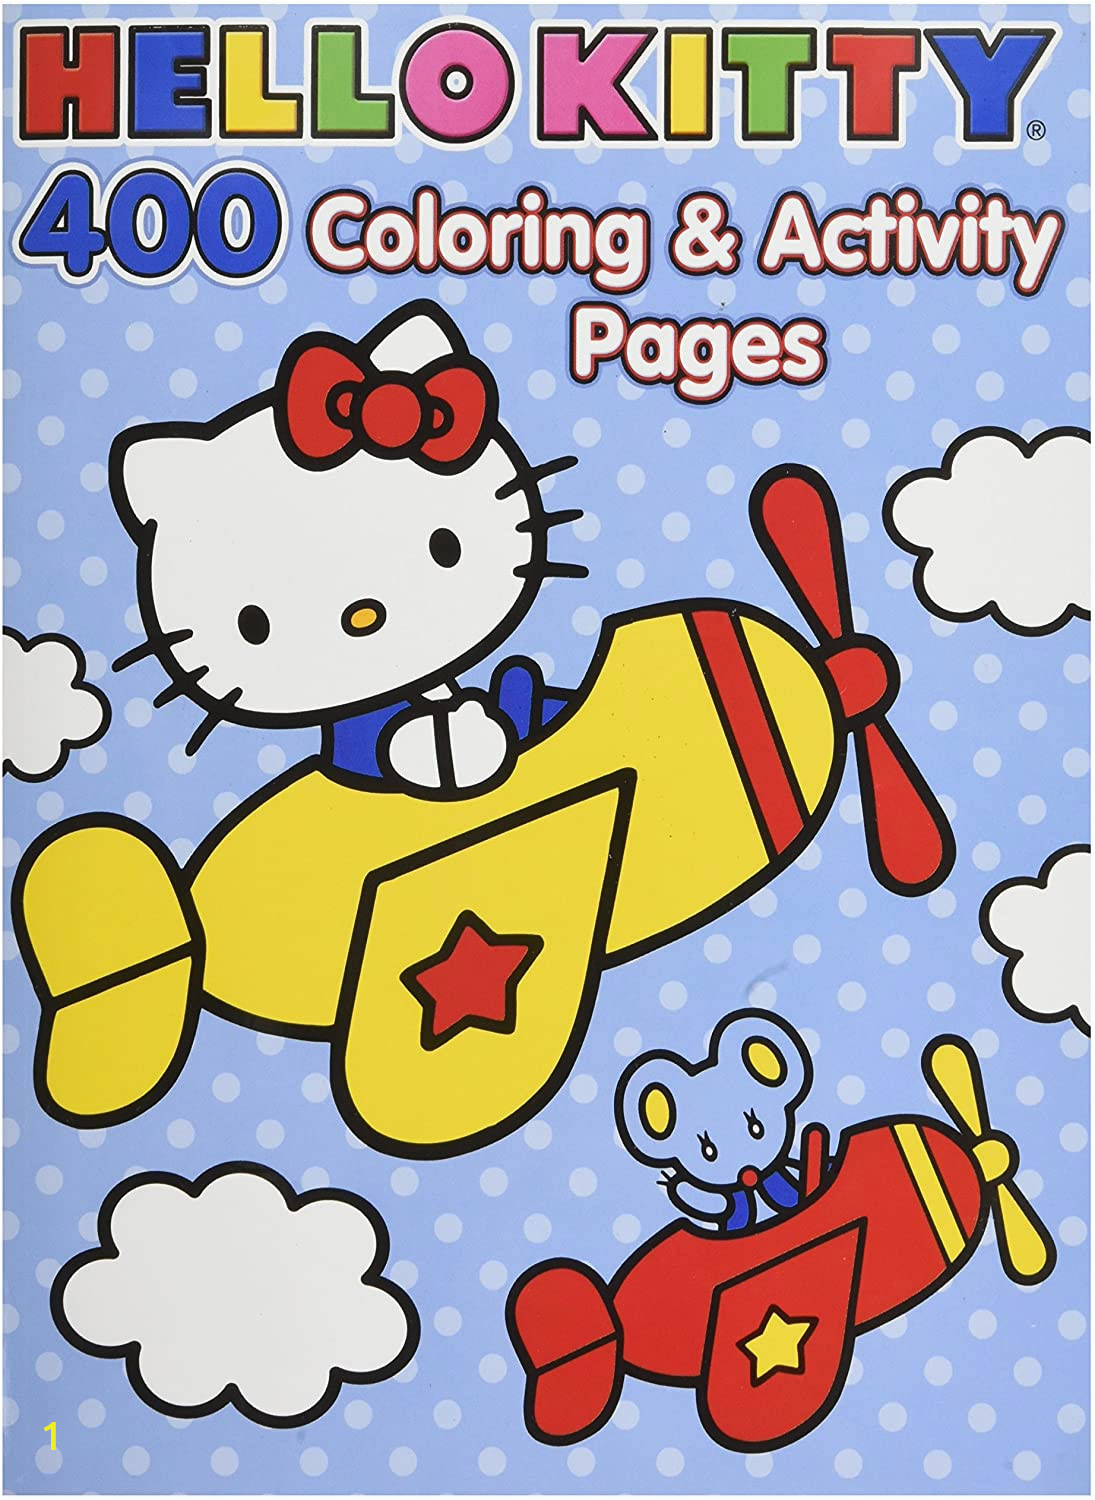 Hello Kitty Get Well soon Coloring Pages Hello Kitty Coloring Book Jumbo 400 Pages Featuring Classic Hello Kitty Characters